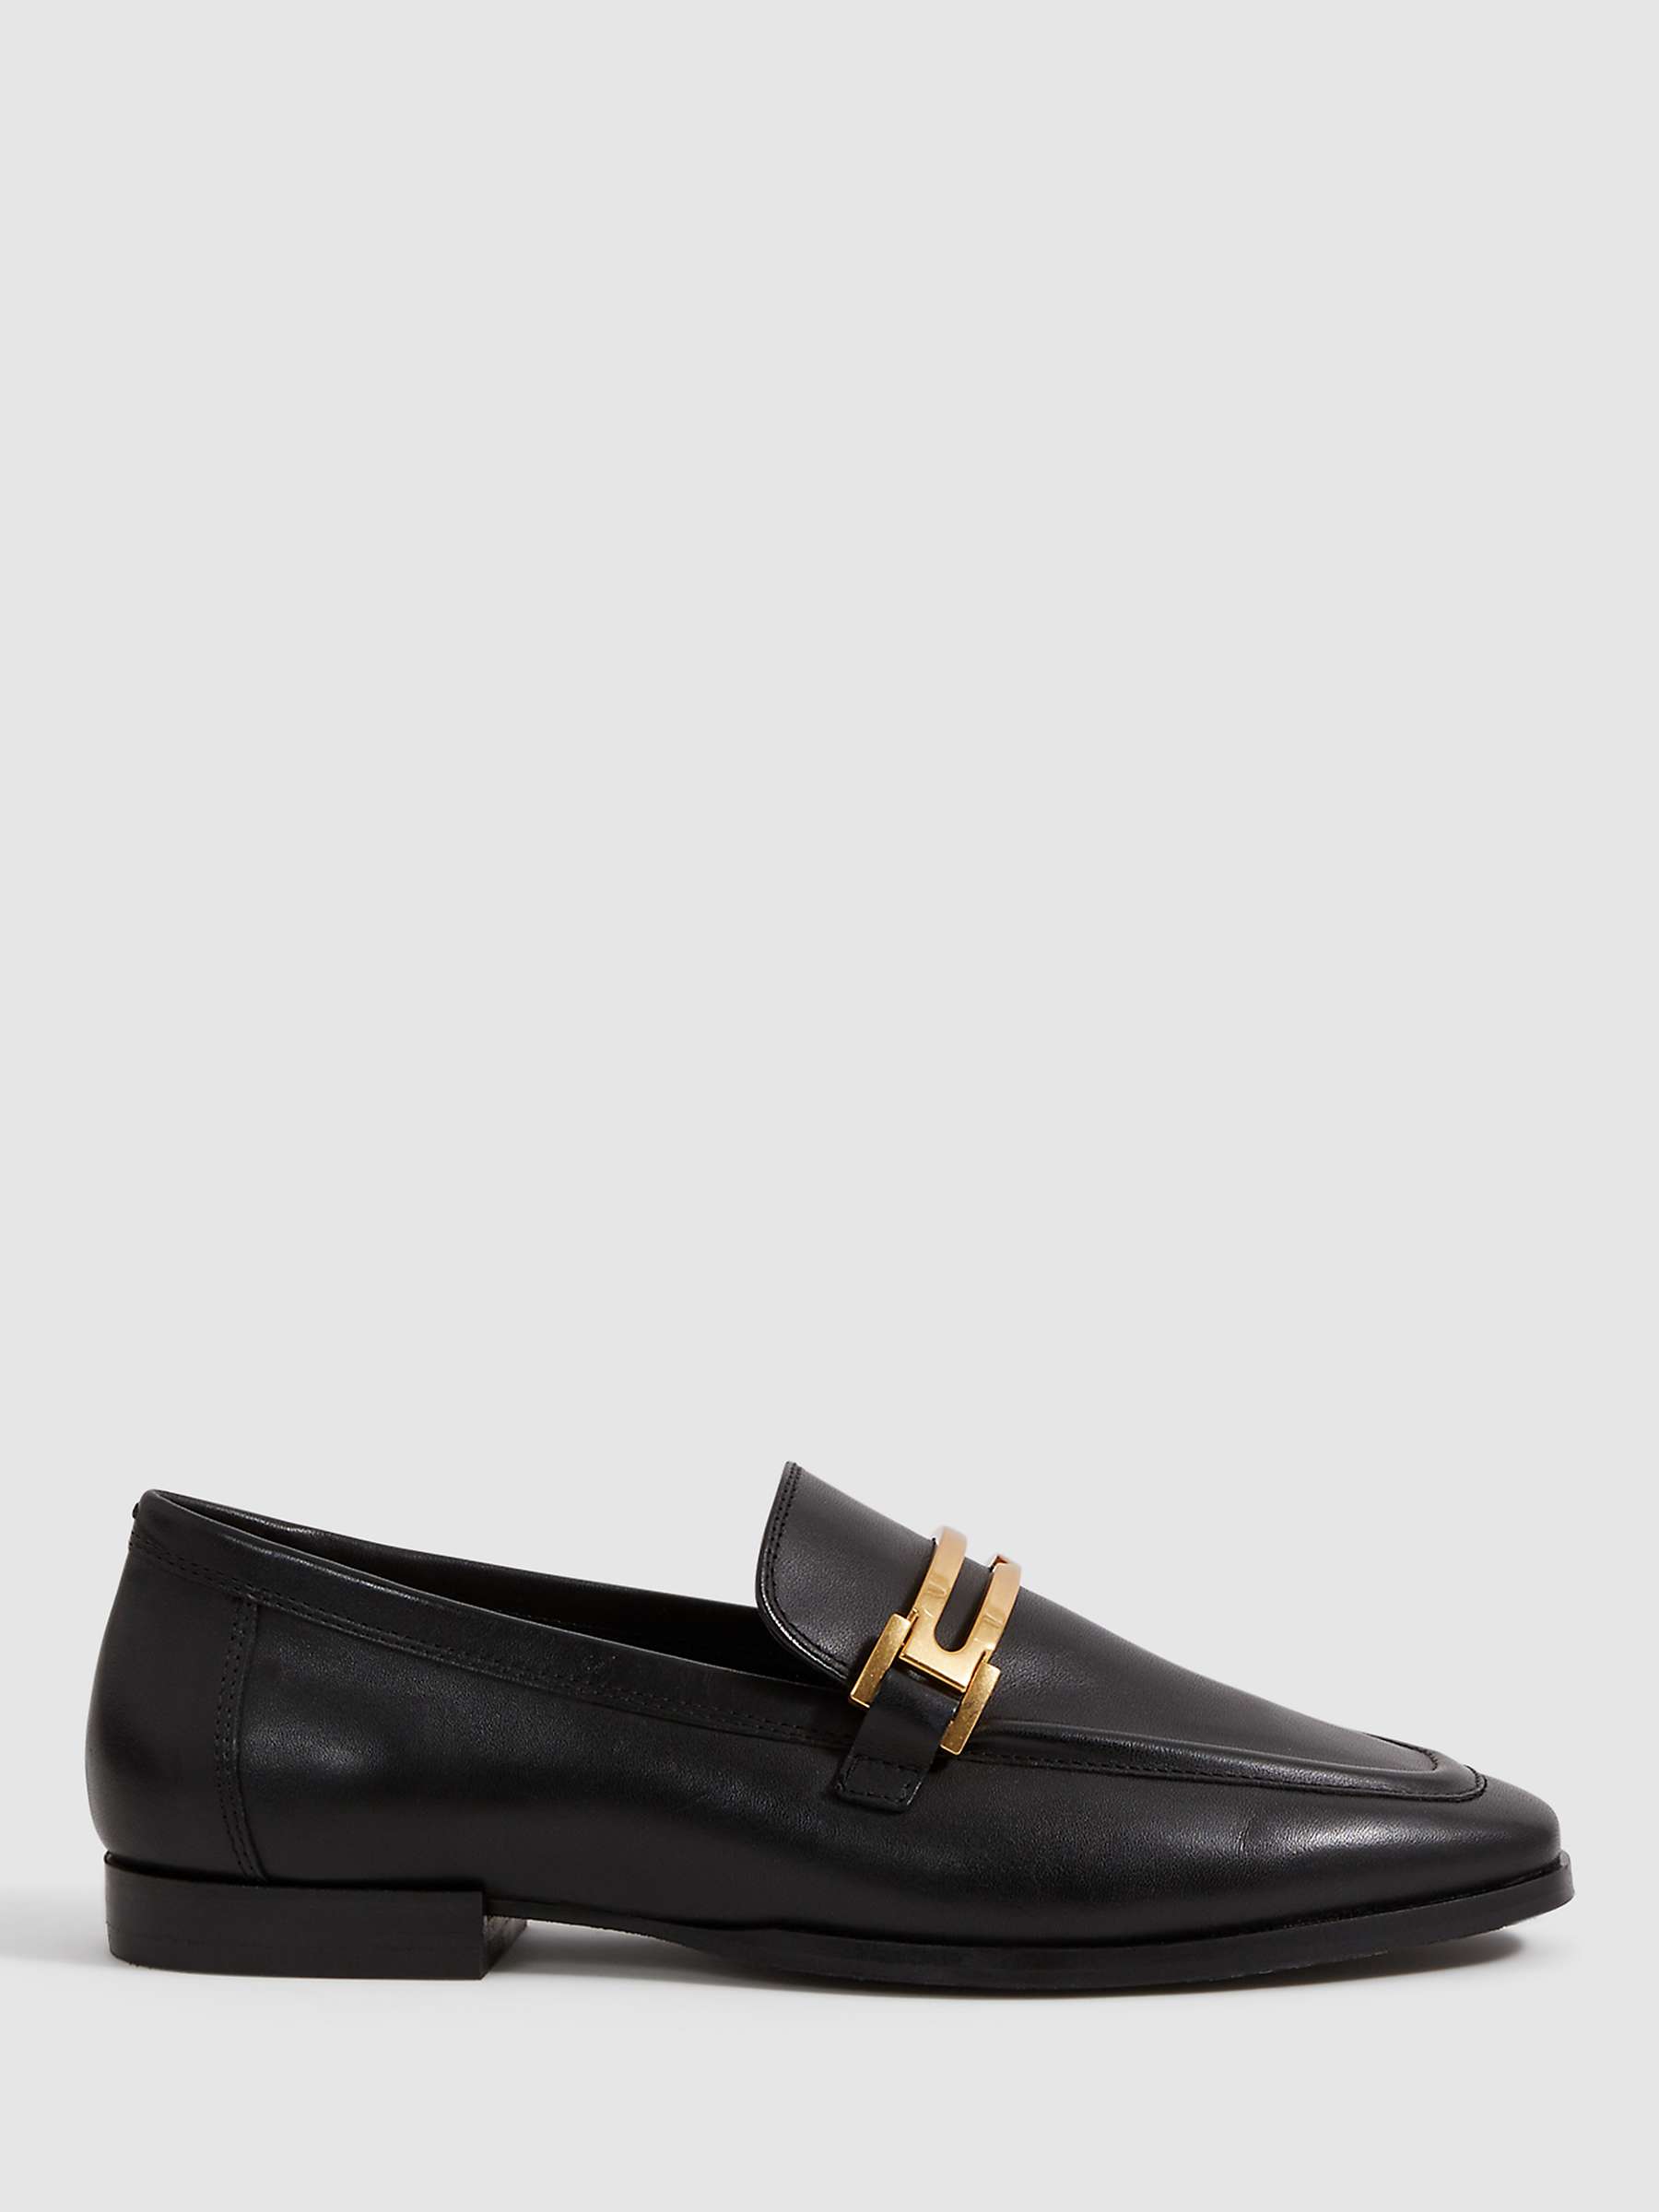 Buy Reiss Angela Metal Trim Leather Loafers Online at johnlewis.com